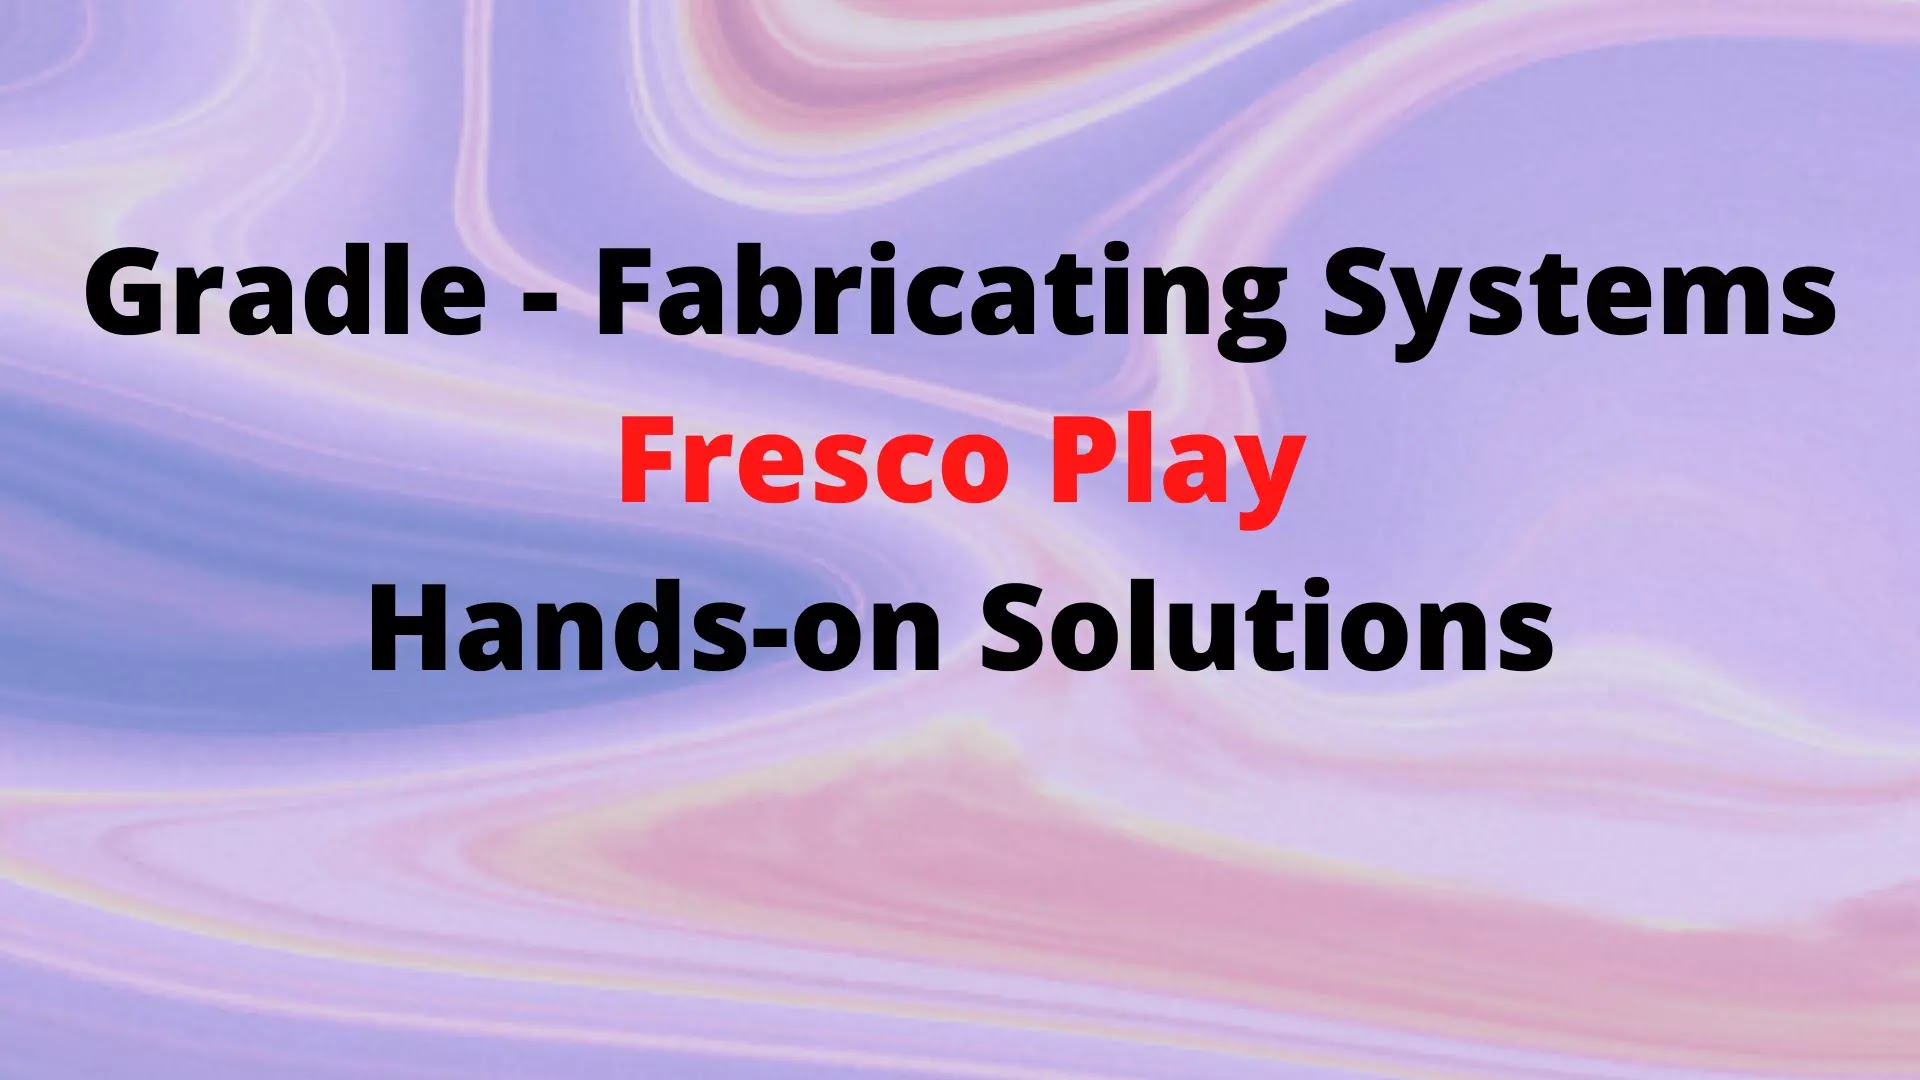 Gradle - Fabricating Systems Hands-on Solutions | TCS Fresco Play